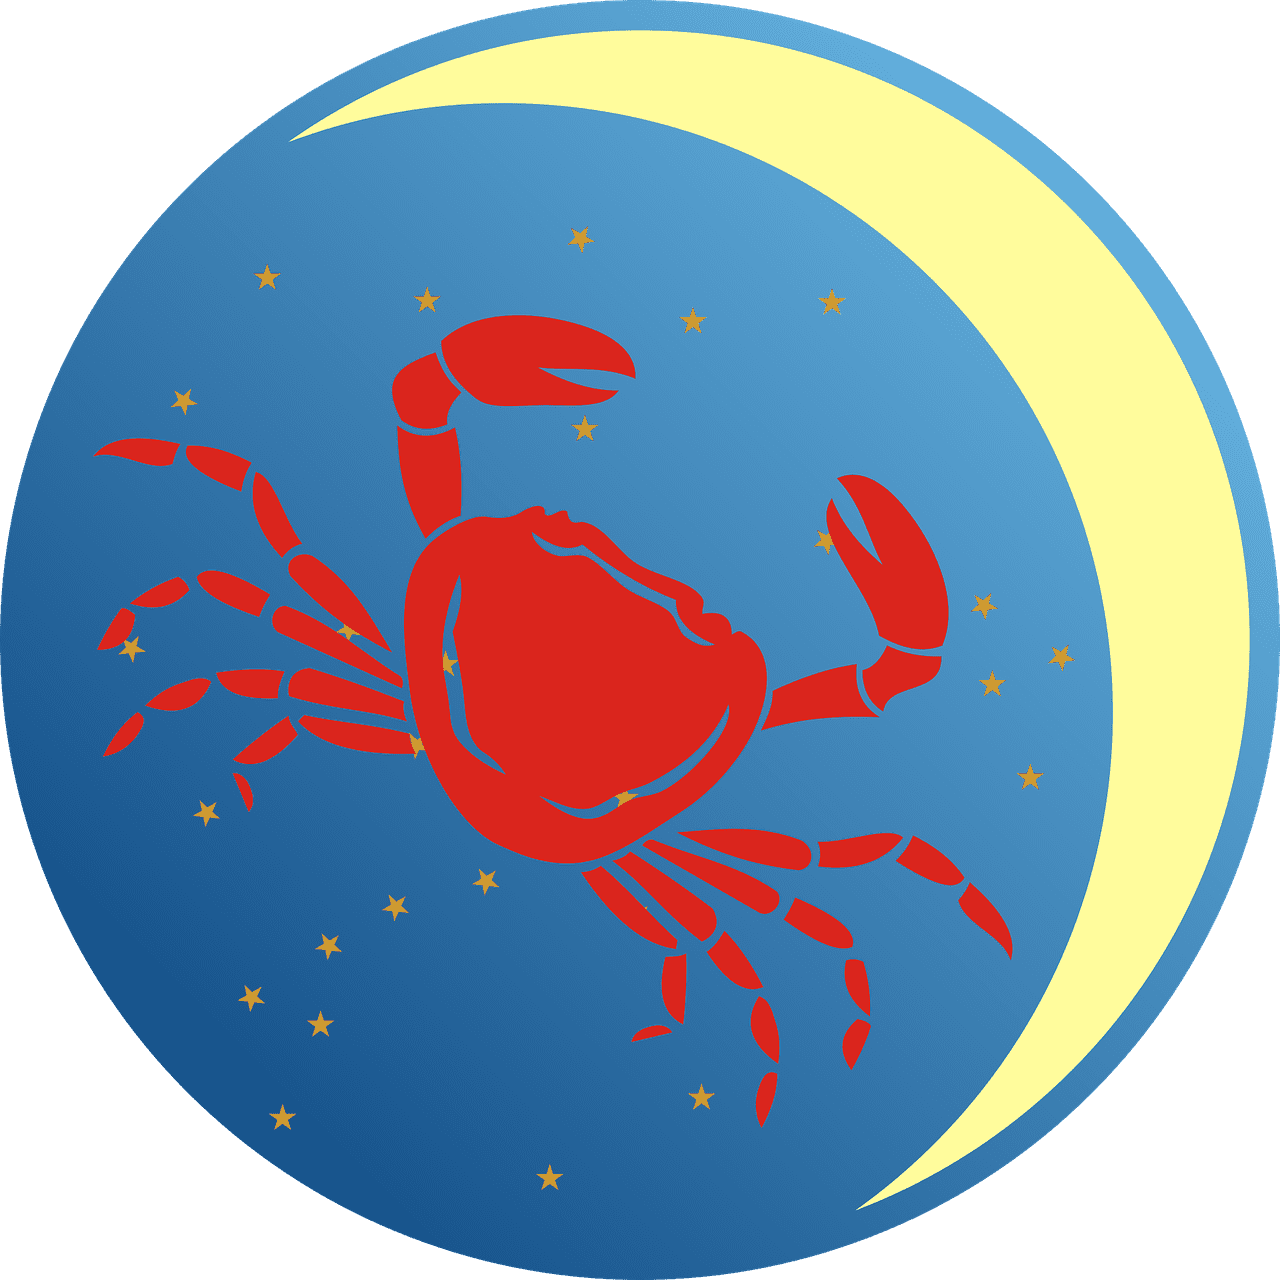 A depiction of the Cancer star sign | Photo: Pixabay/13smok